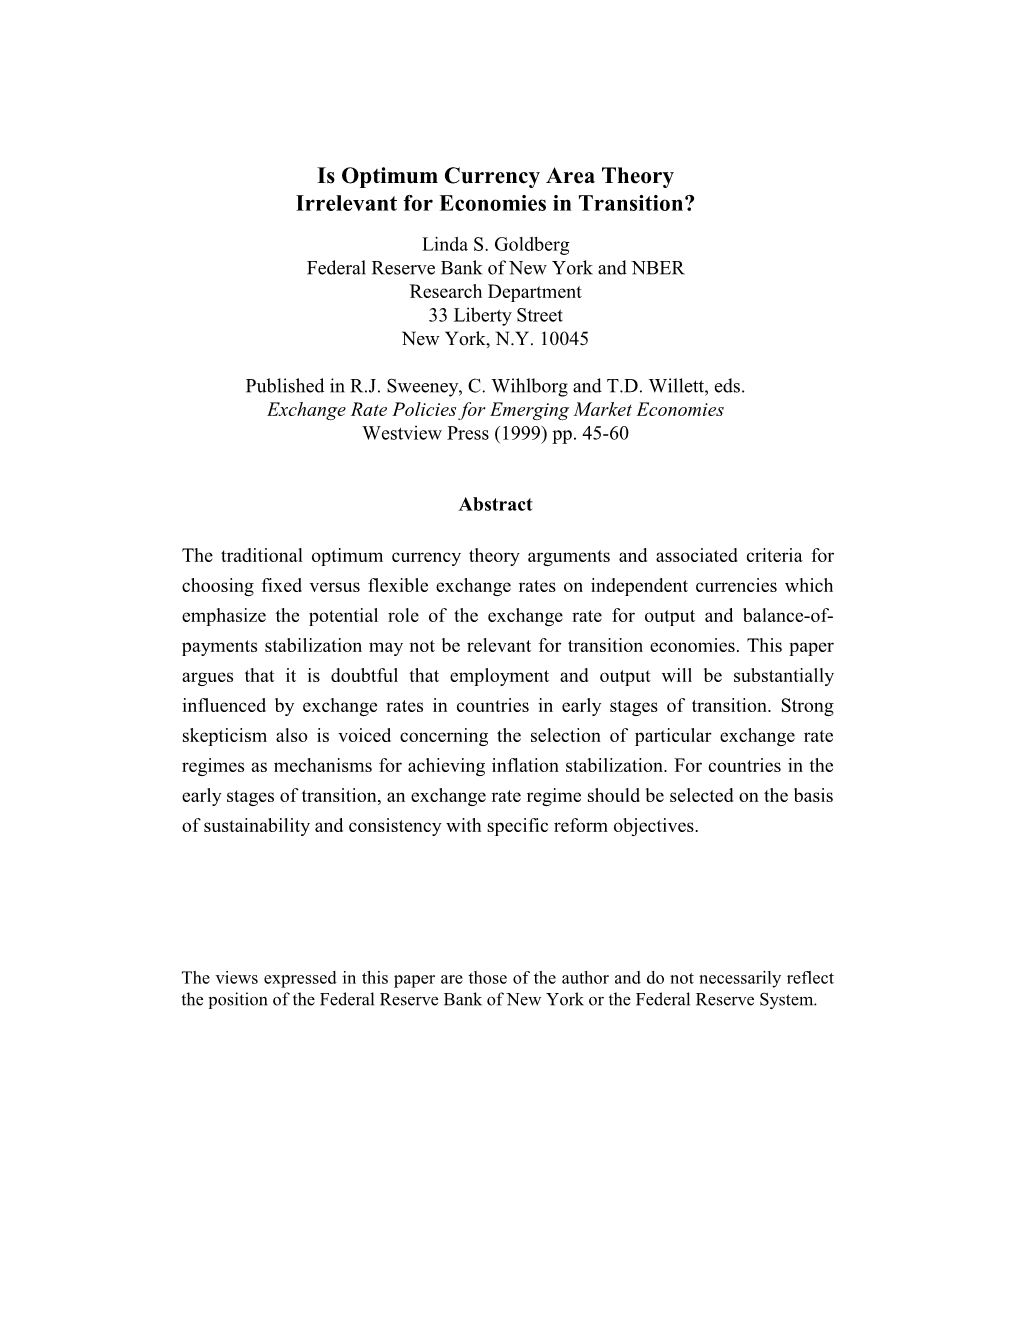 Is Optimum Currency Area Theory Irrelevant for Economies in Transition? Linda S